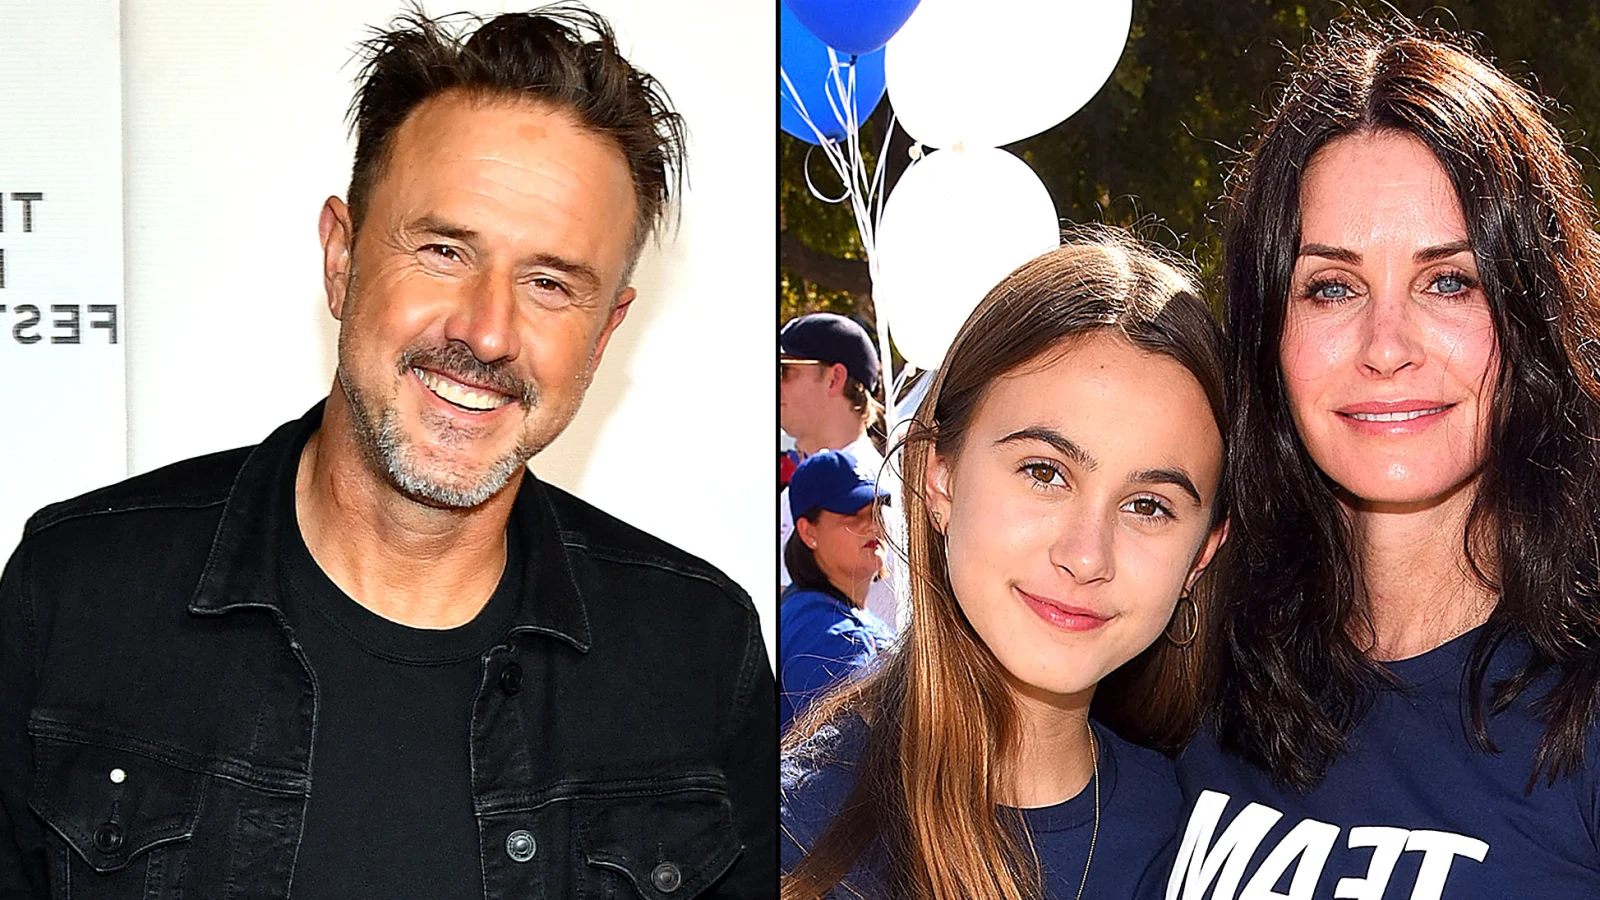 David Arquette and Courteney Cox co-parenting their daughter Coco 